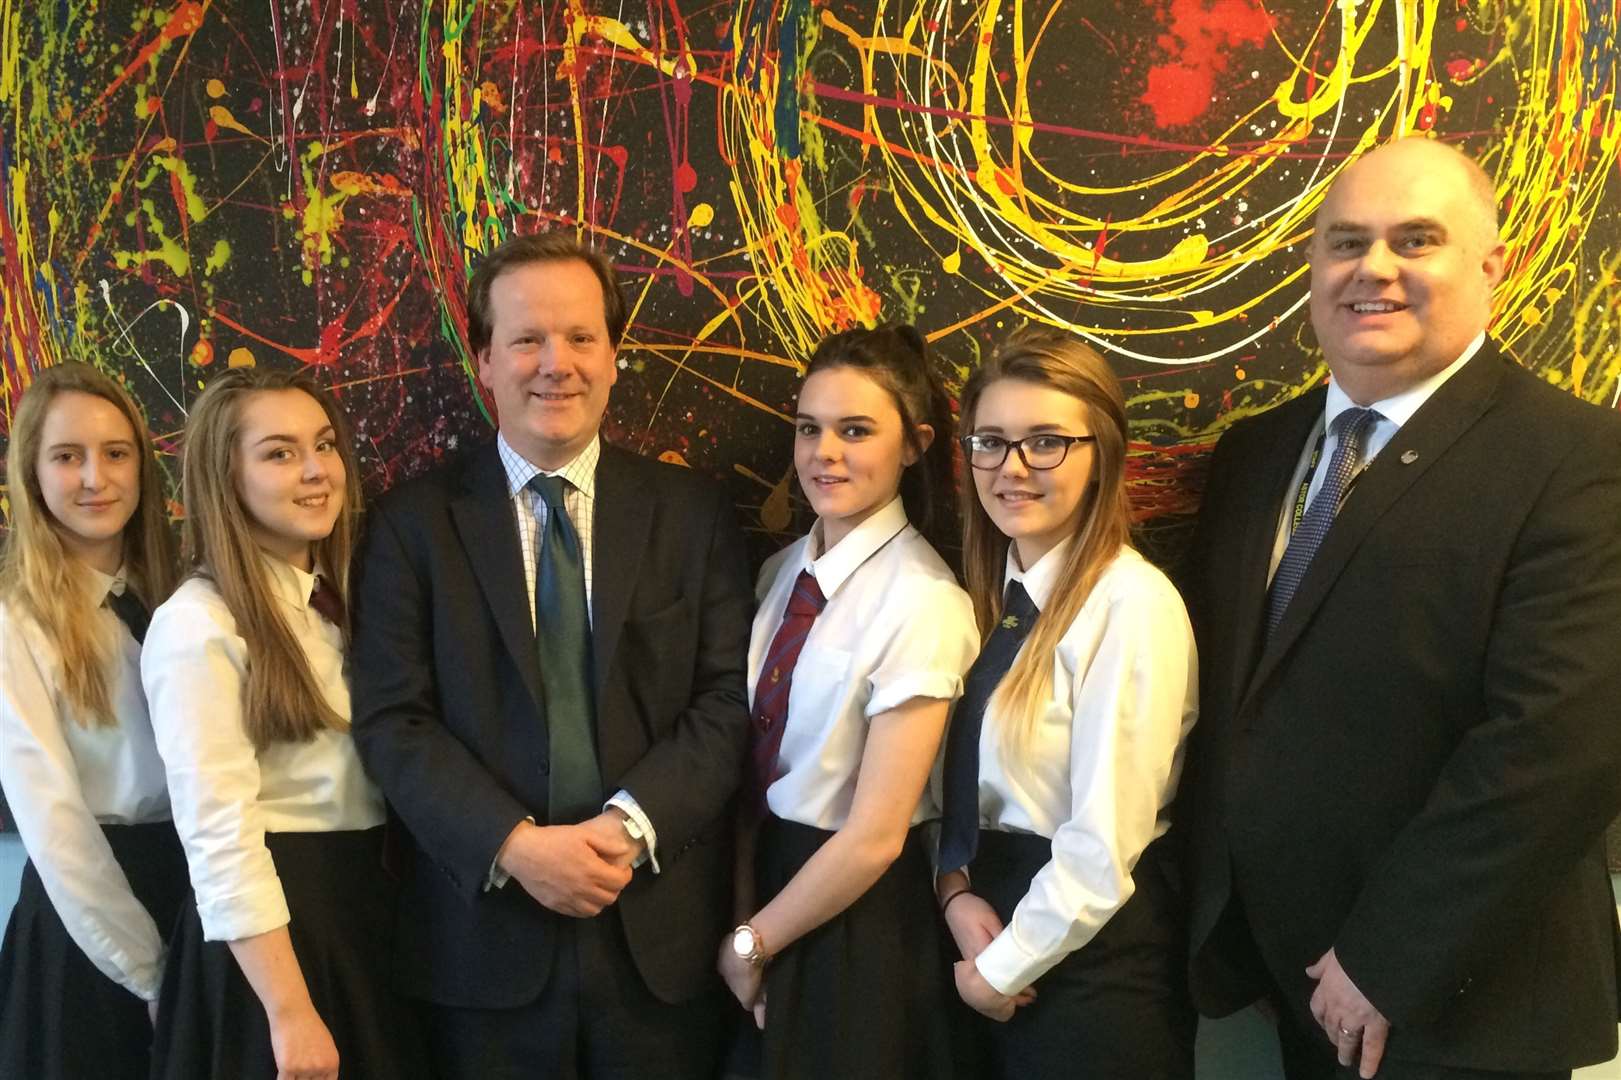 Astor sixth formers Emma Howsam, Lauren Brown, Yasmin Smith and Erica White with Dover MP Charlie Elphicke and head teacher Lee Kane